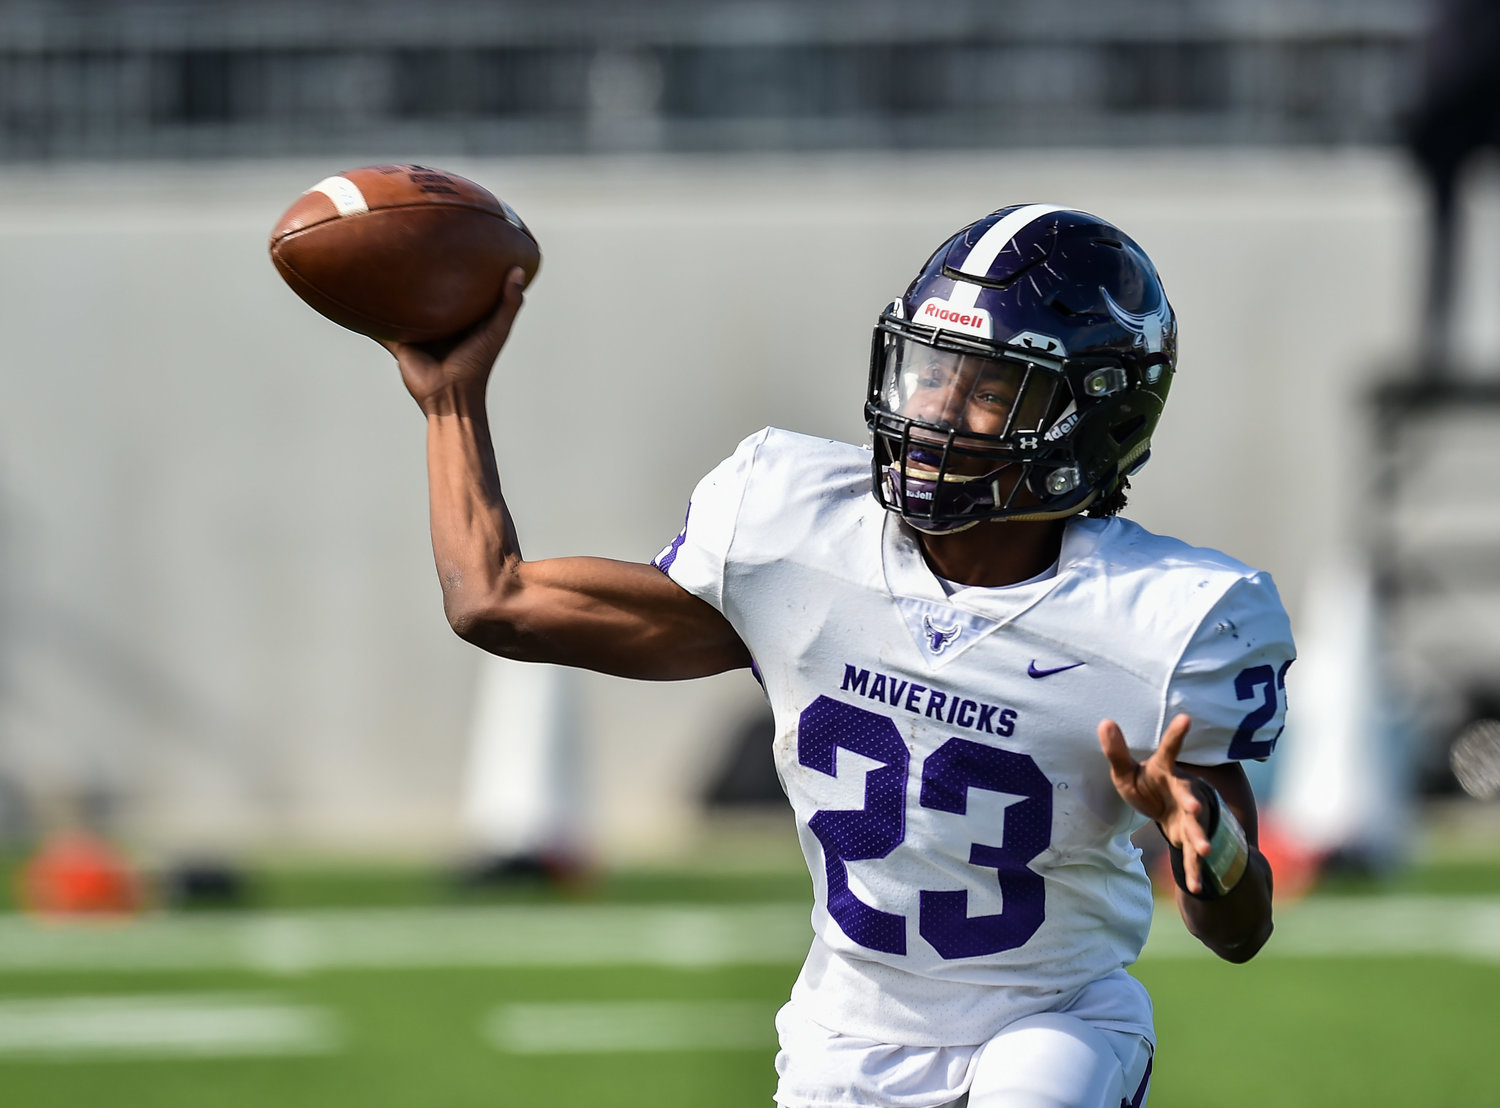 Katy Tx. - Nov 2, 2019: Morton Ranch's QB Jaymarcus Wilson (23) delivers a pass during a game with Seven Lakes Spartans and Morton Ranch Mavericks at Legacy Stadium in Katy Tx. (Photo by Mark Goodman / Katy Times)